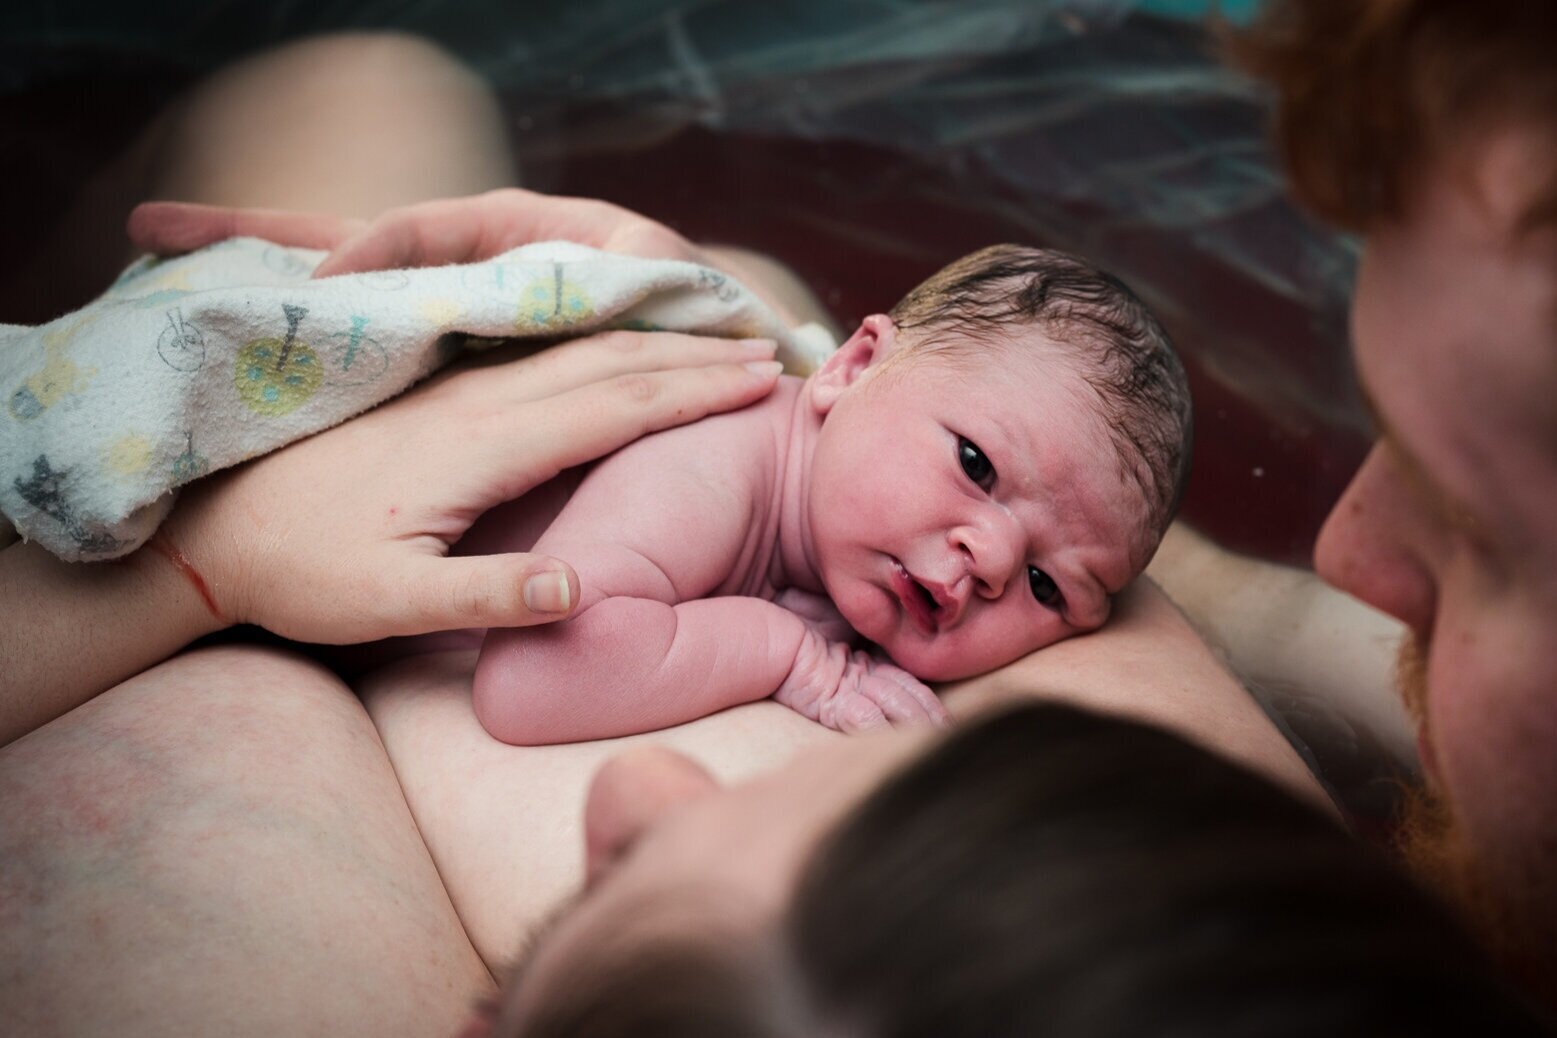 Gather+Birth+Cooperative-+Doula+Support+and+Birth+Photography+in+Minneapolis+-+April+04%2C+2021+-+181156.jpg